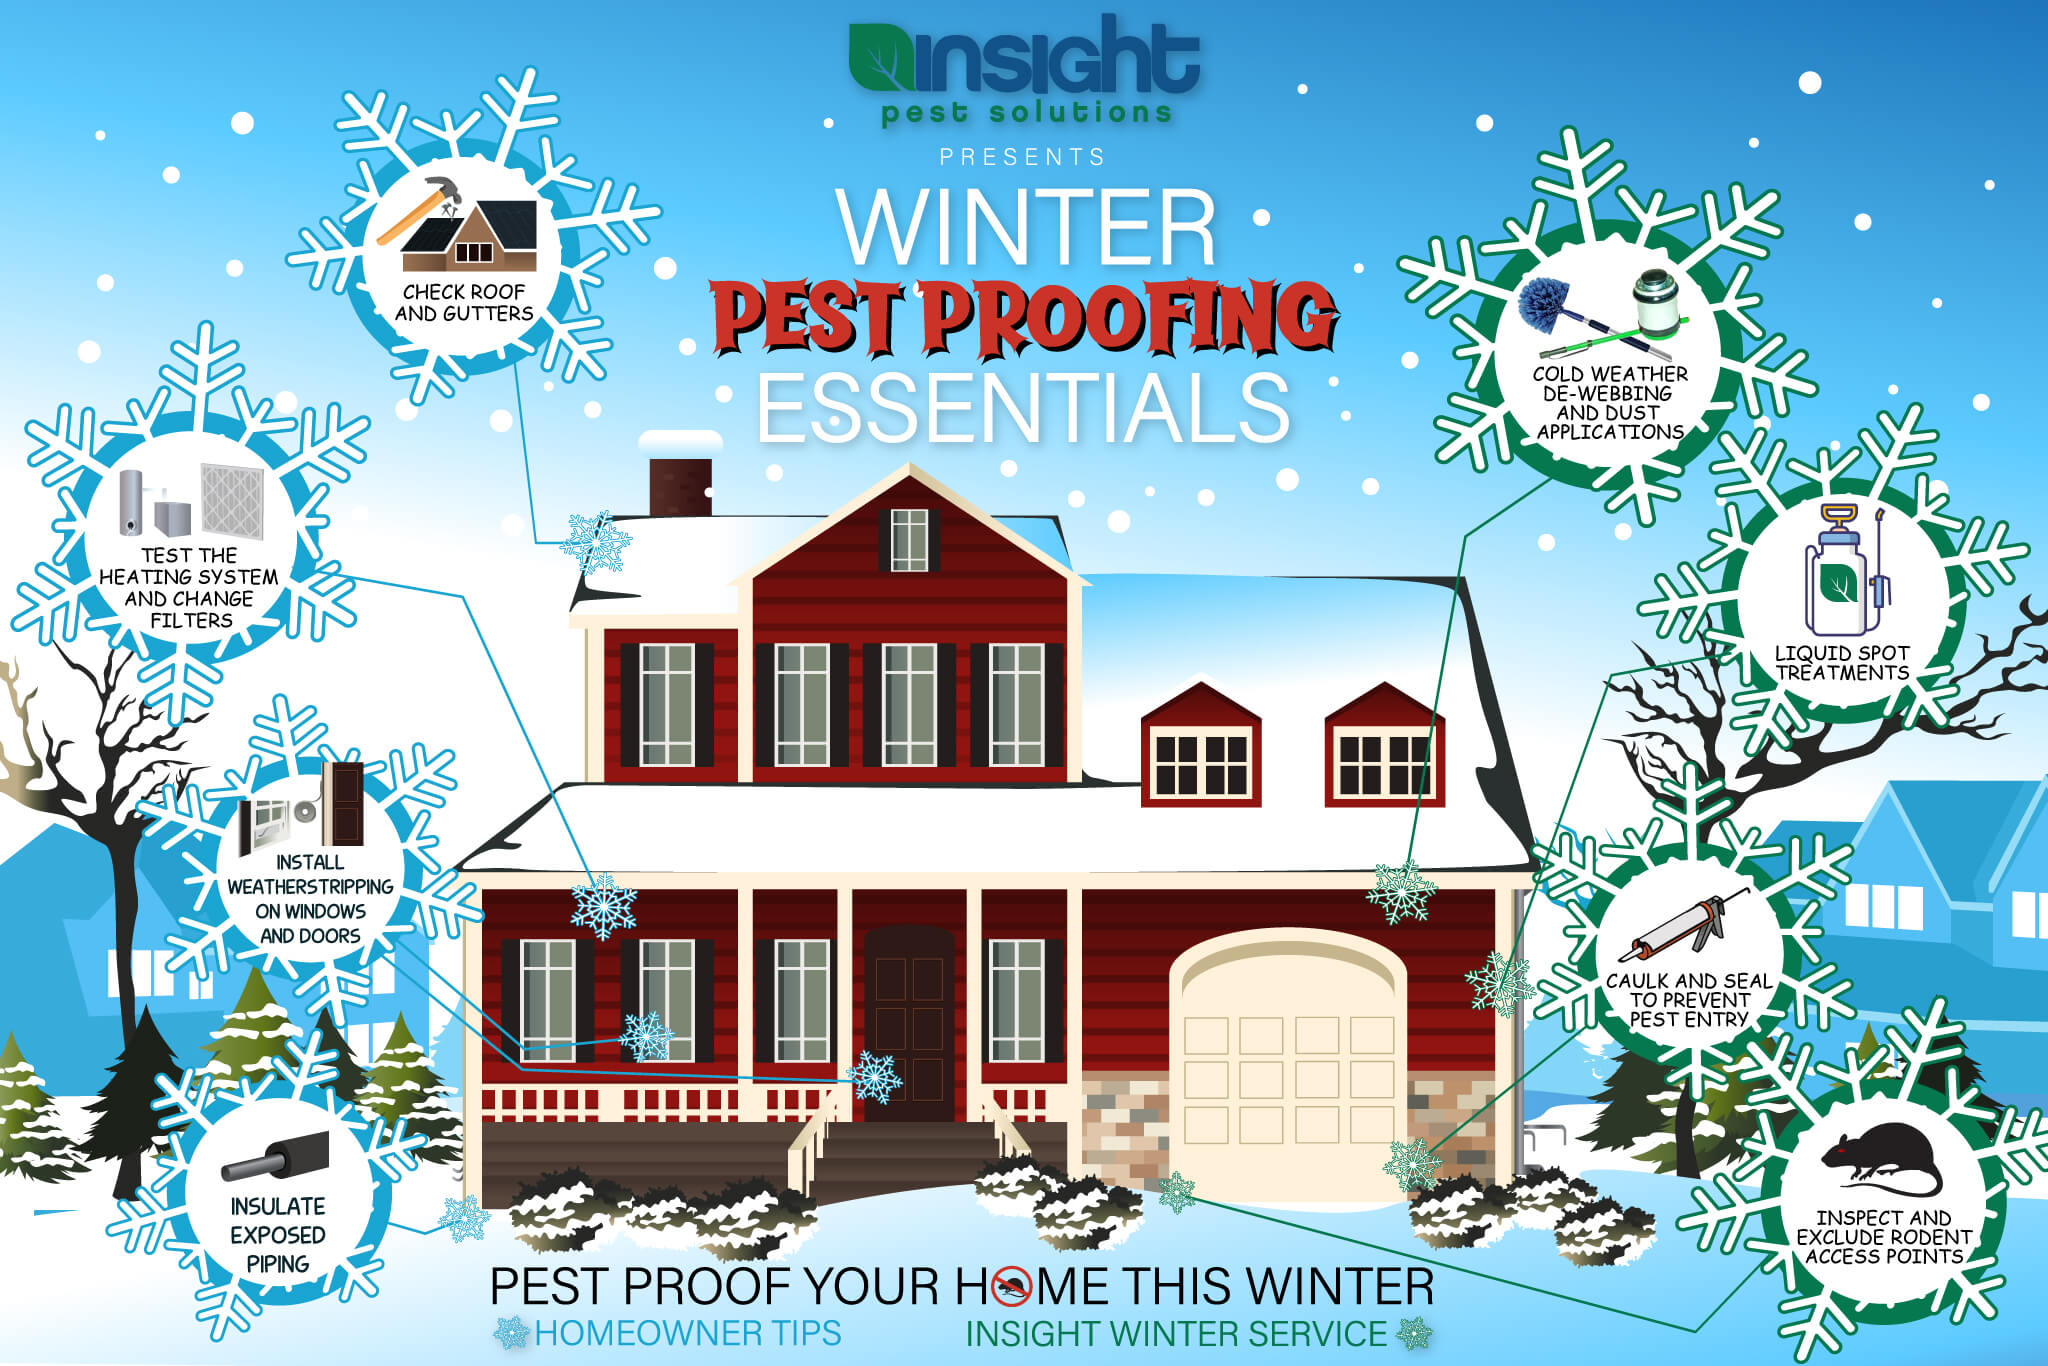 6 reasons to maintain winter pest control efforts for a pest free home